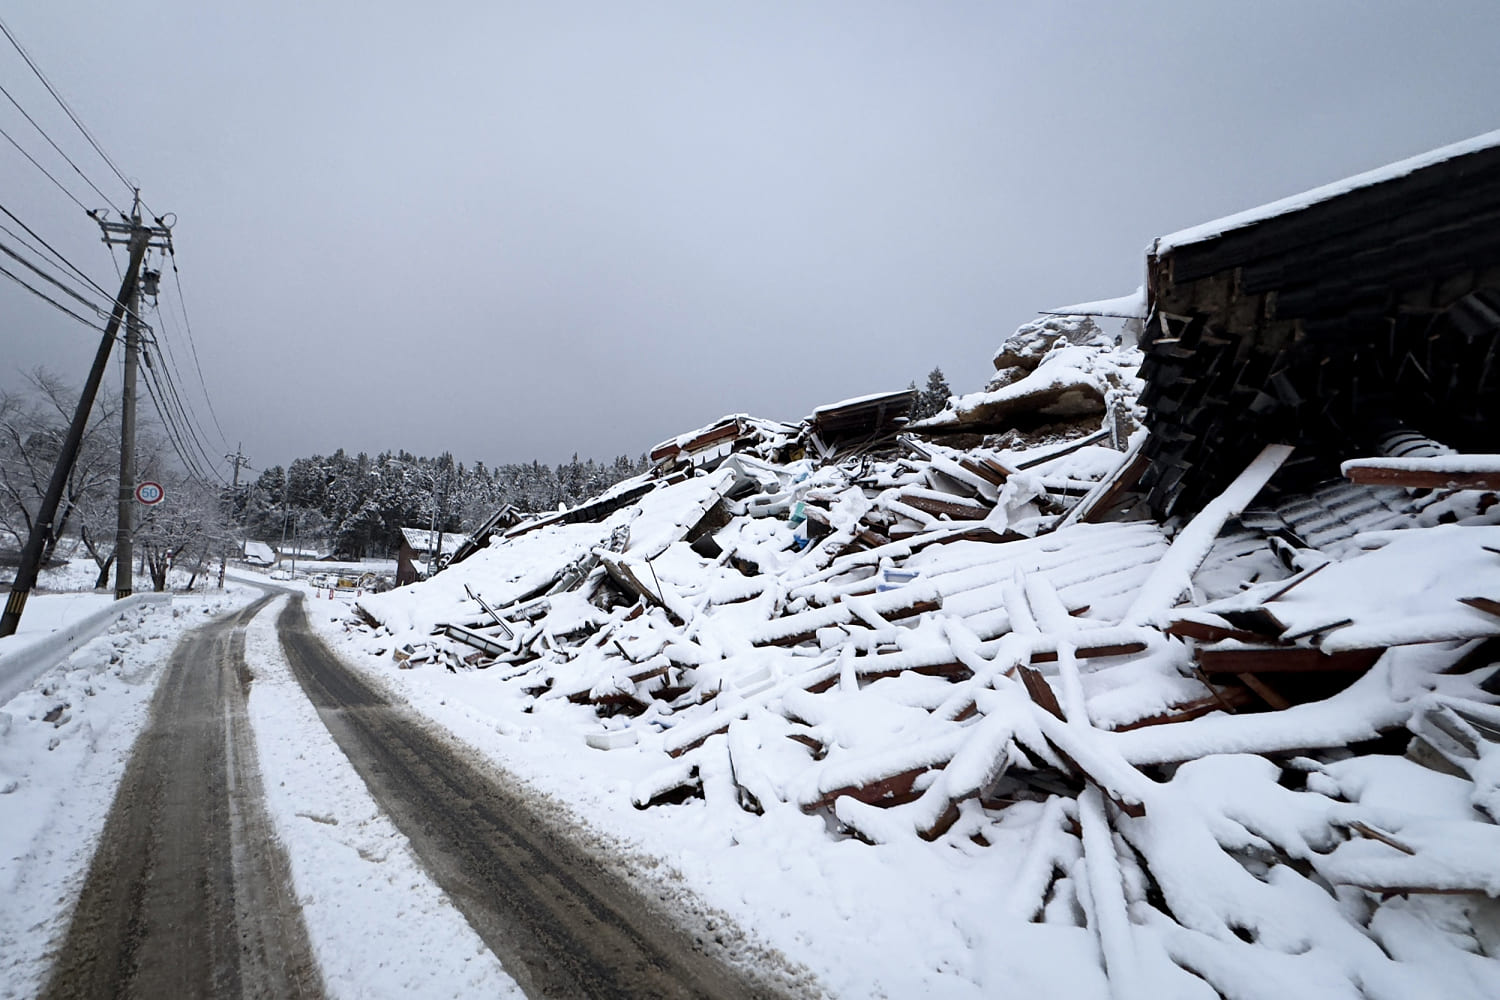 can heavy snowfall trigger earthquakes? a new study suggests a link.